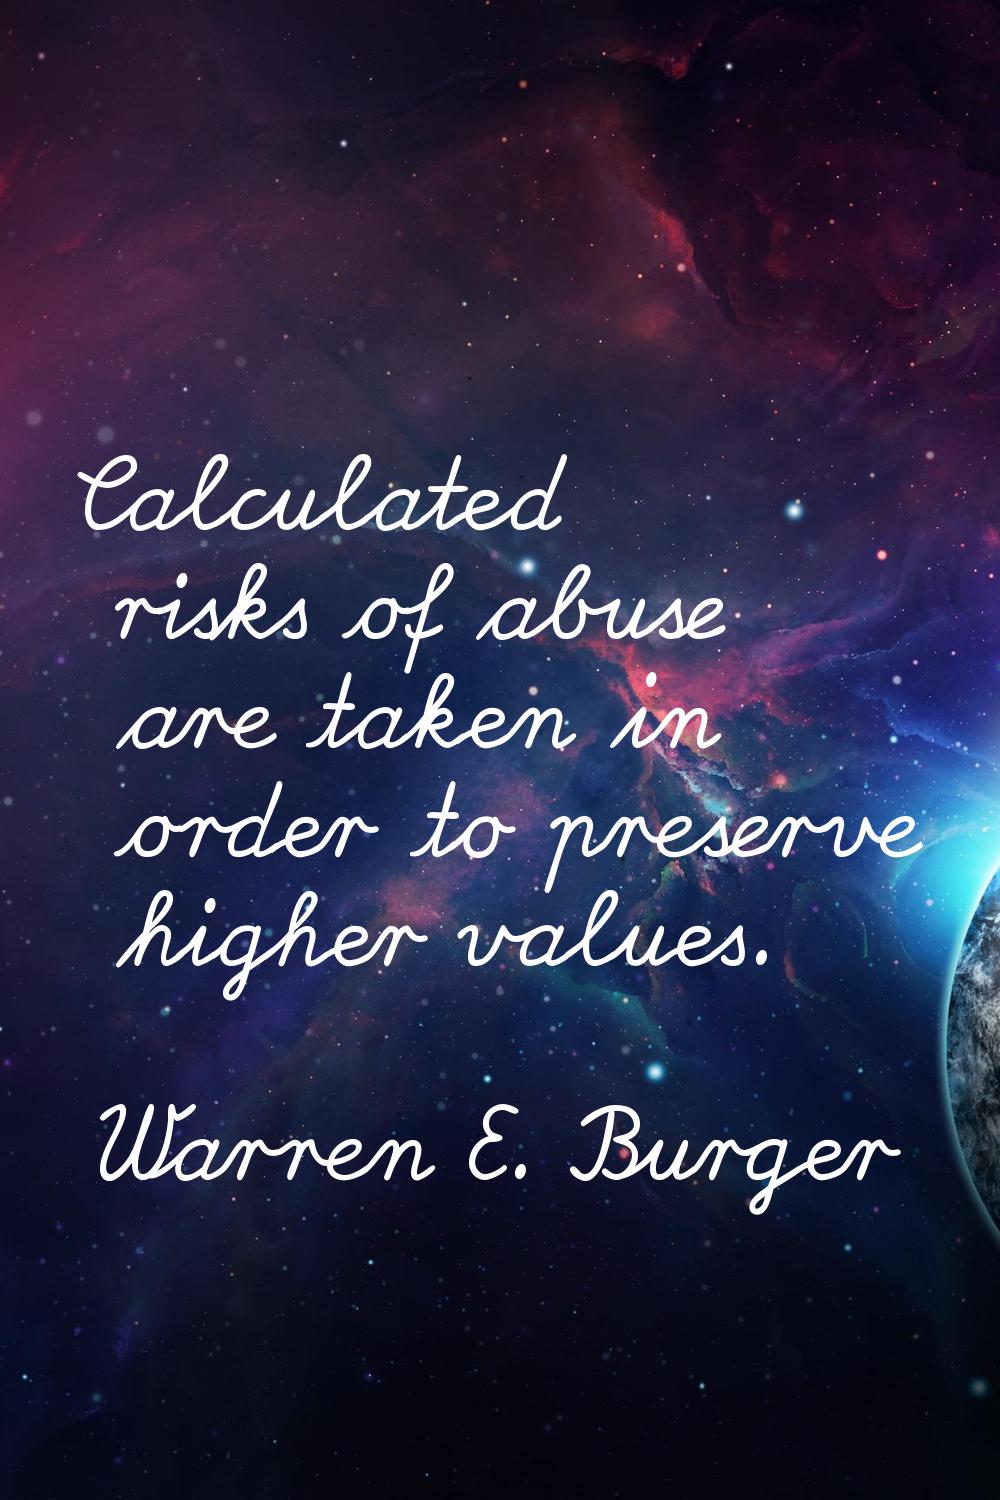 Calculated risks of abuse are taken in order to preserve higher values.